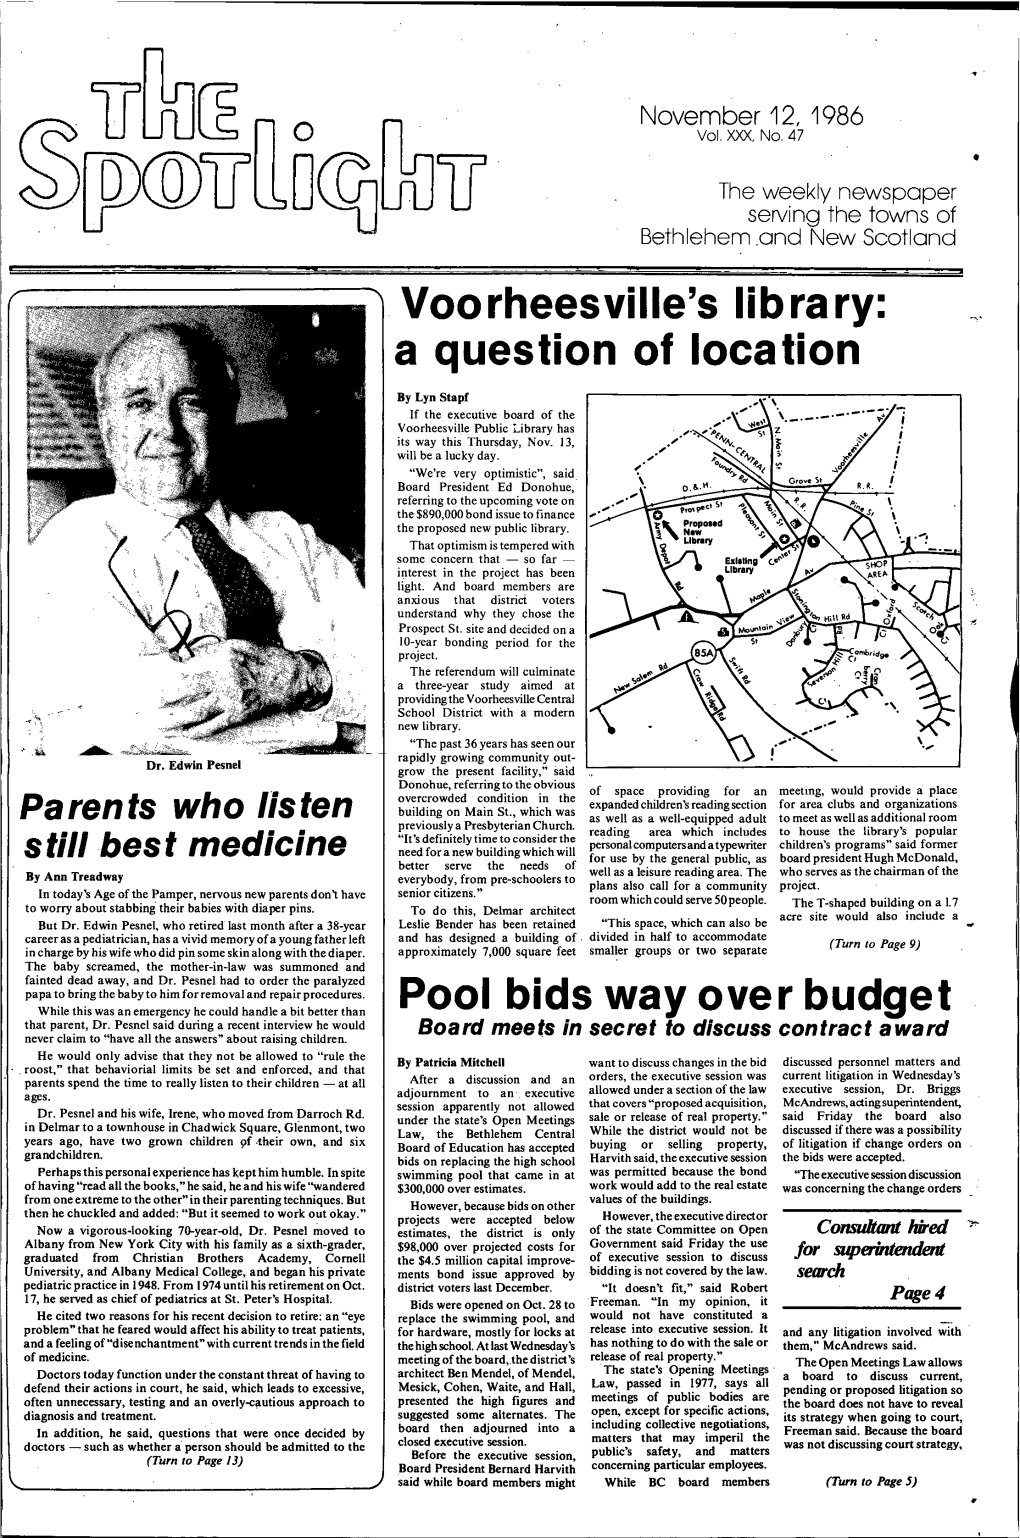 Voorheesville's Library: a Question of Location Pool Bids Way Over Budget